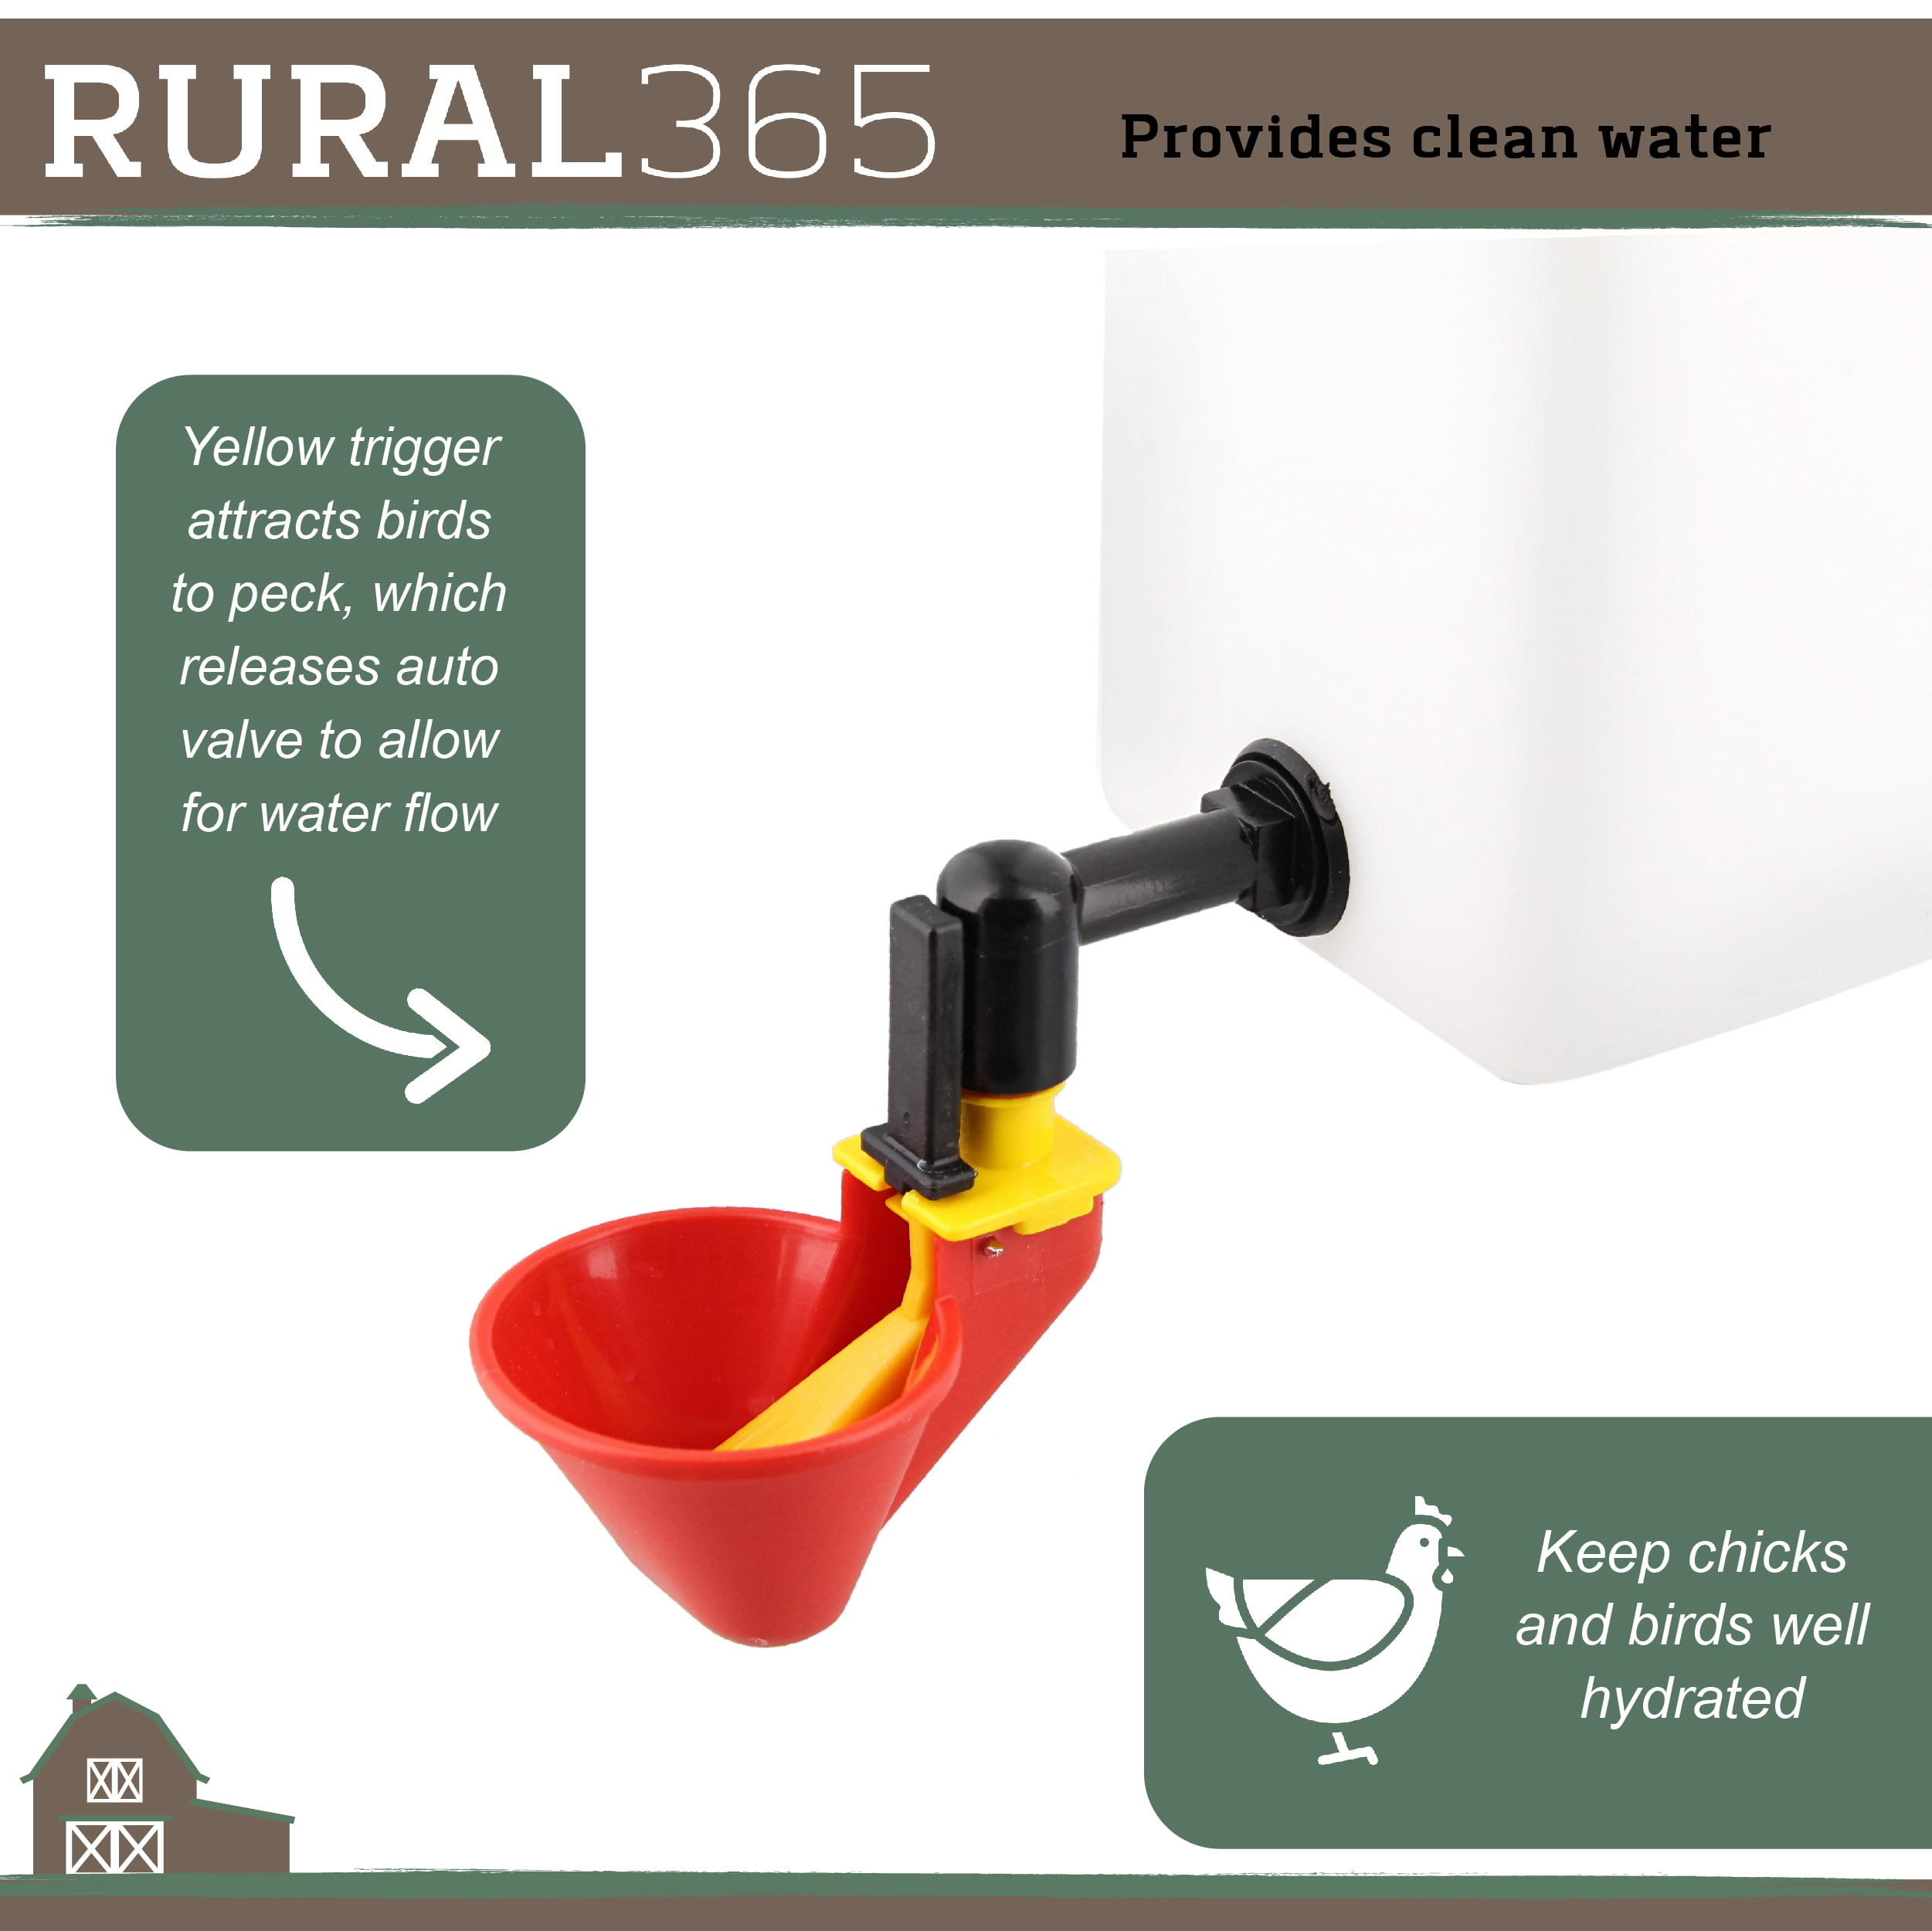 Rural365 Automatic Chicken Waterer System - 1L Red Poultry Watering Cup